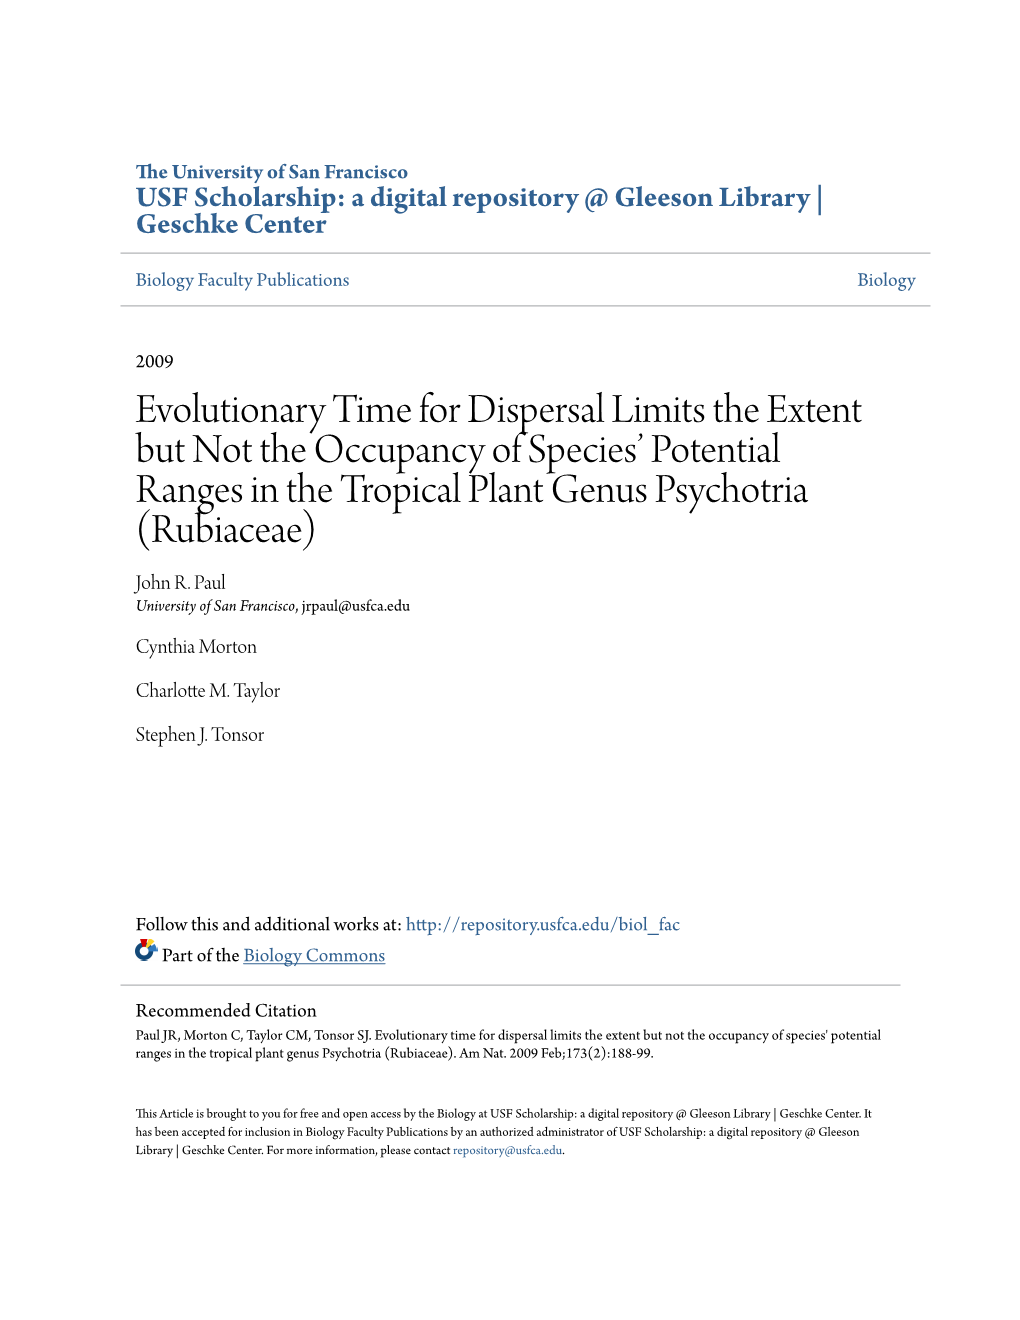 Evolutionary Time for Dispersal Limits the Extent but Not the Occupancy of Species’ Potential Ranges in the Tropical Plant Genus Psychotria (Rubiaceae) John R